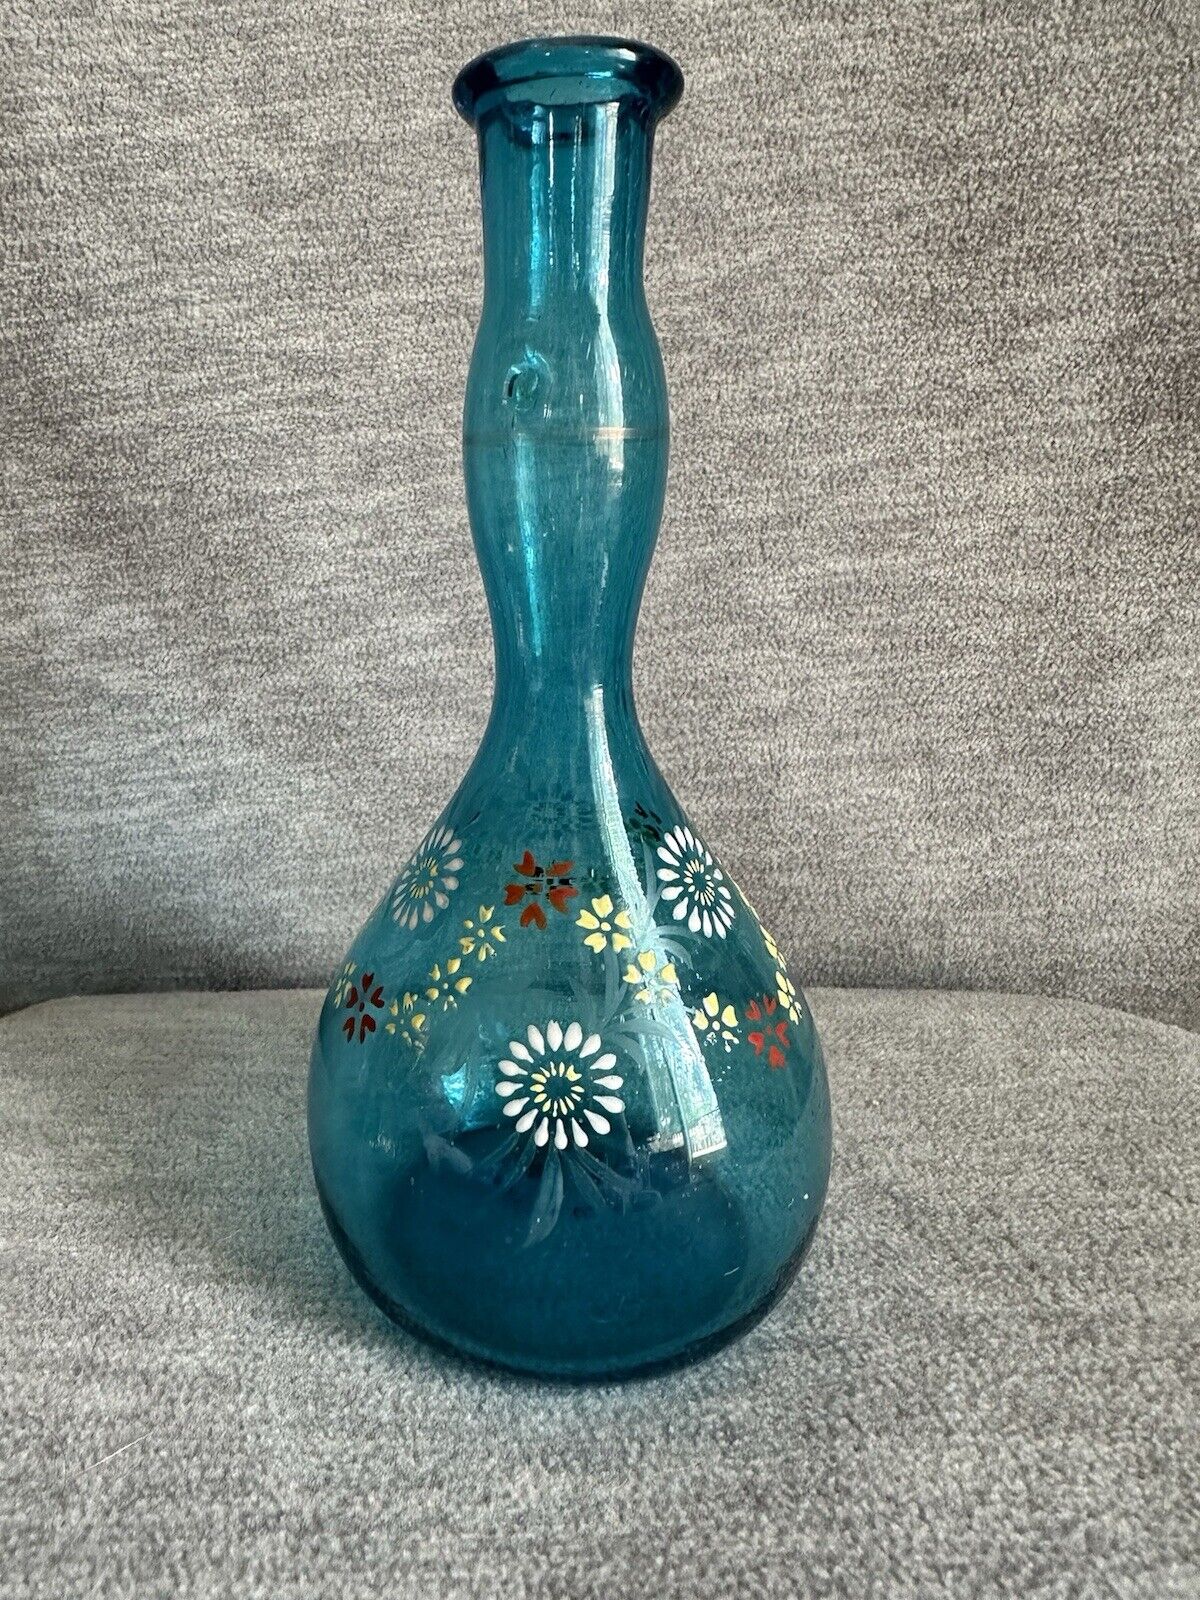 Antique Turquoise Blue Glass Barber Bottle with Enameled Flowers